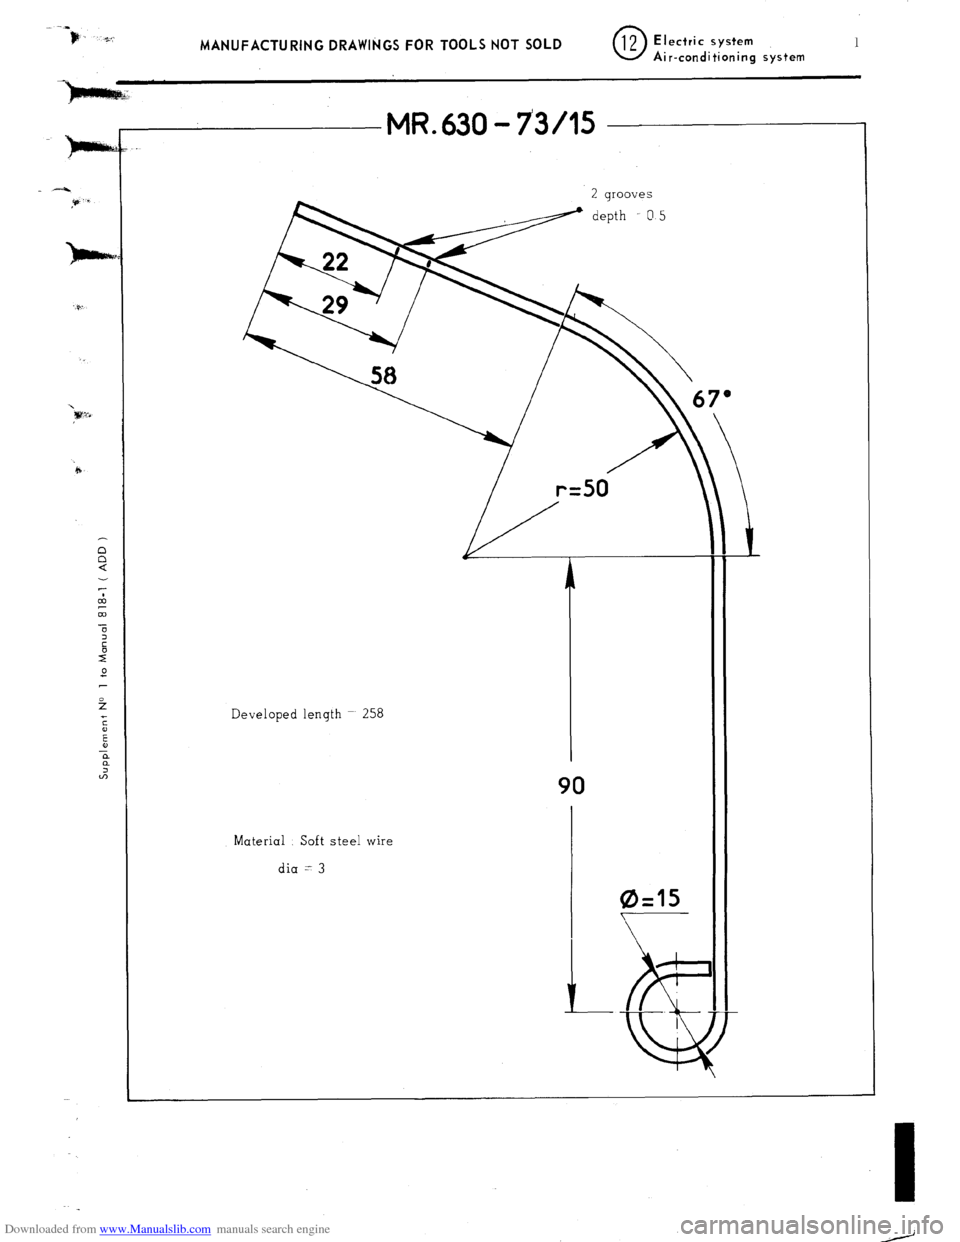 Citroen CX 1979 1.G Workshop Manual Downloaded from www.Manualslib.com manuals search engine MANUFACTURING DRAWINGS FOR TOOLS NOT SOLD 0 12 Electric system 1 Air-conditioning system n 
n 
a 
MR. 630 - 7305 
Developed length ~ 258 
Mater